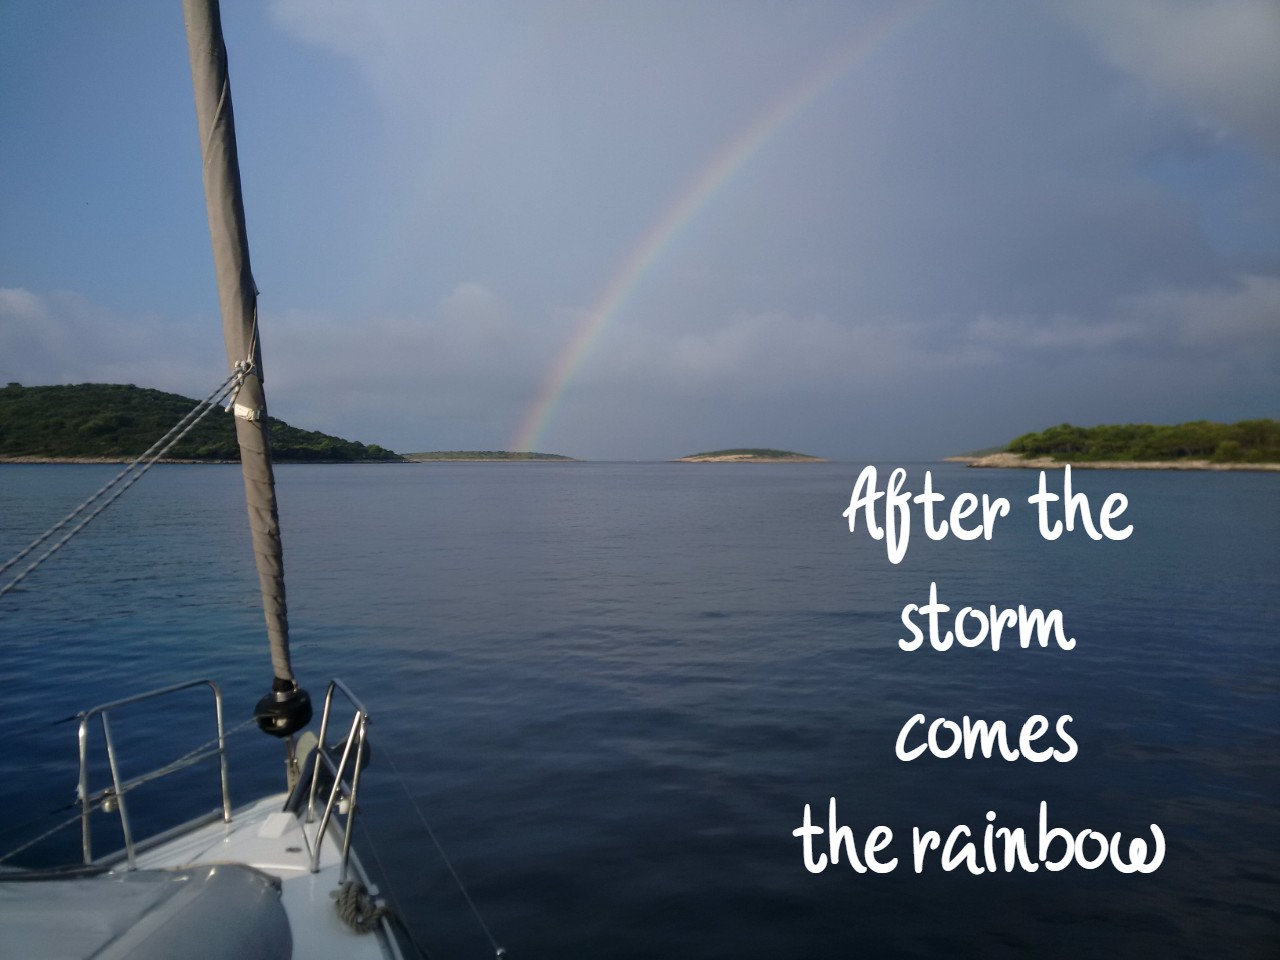 After the storm comes the rainbow